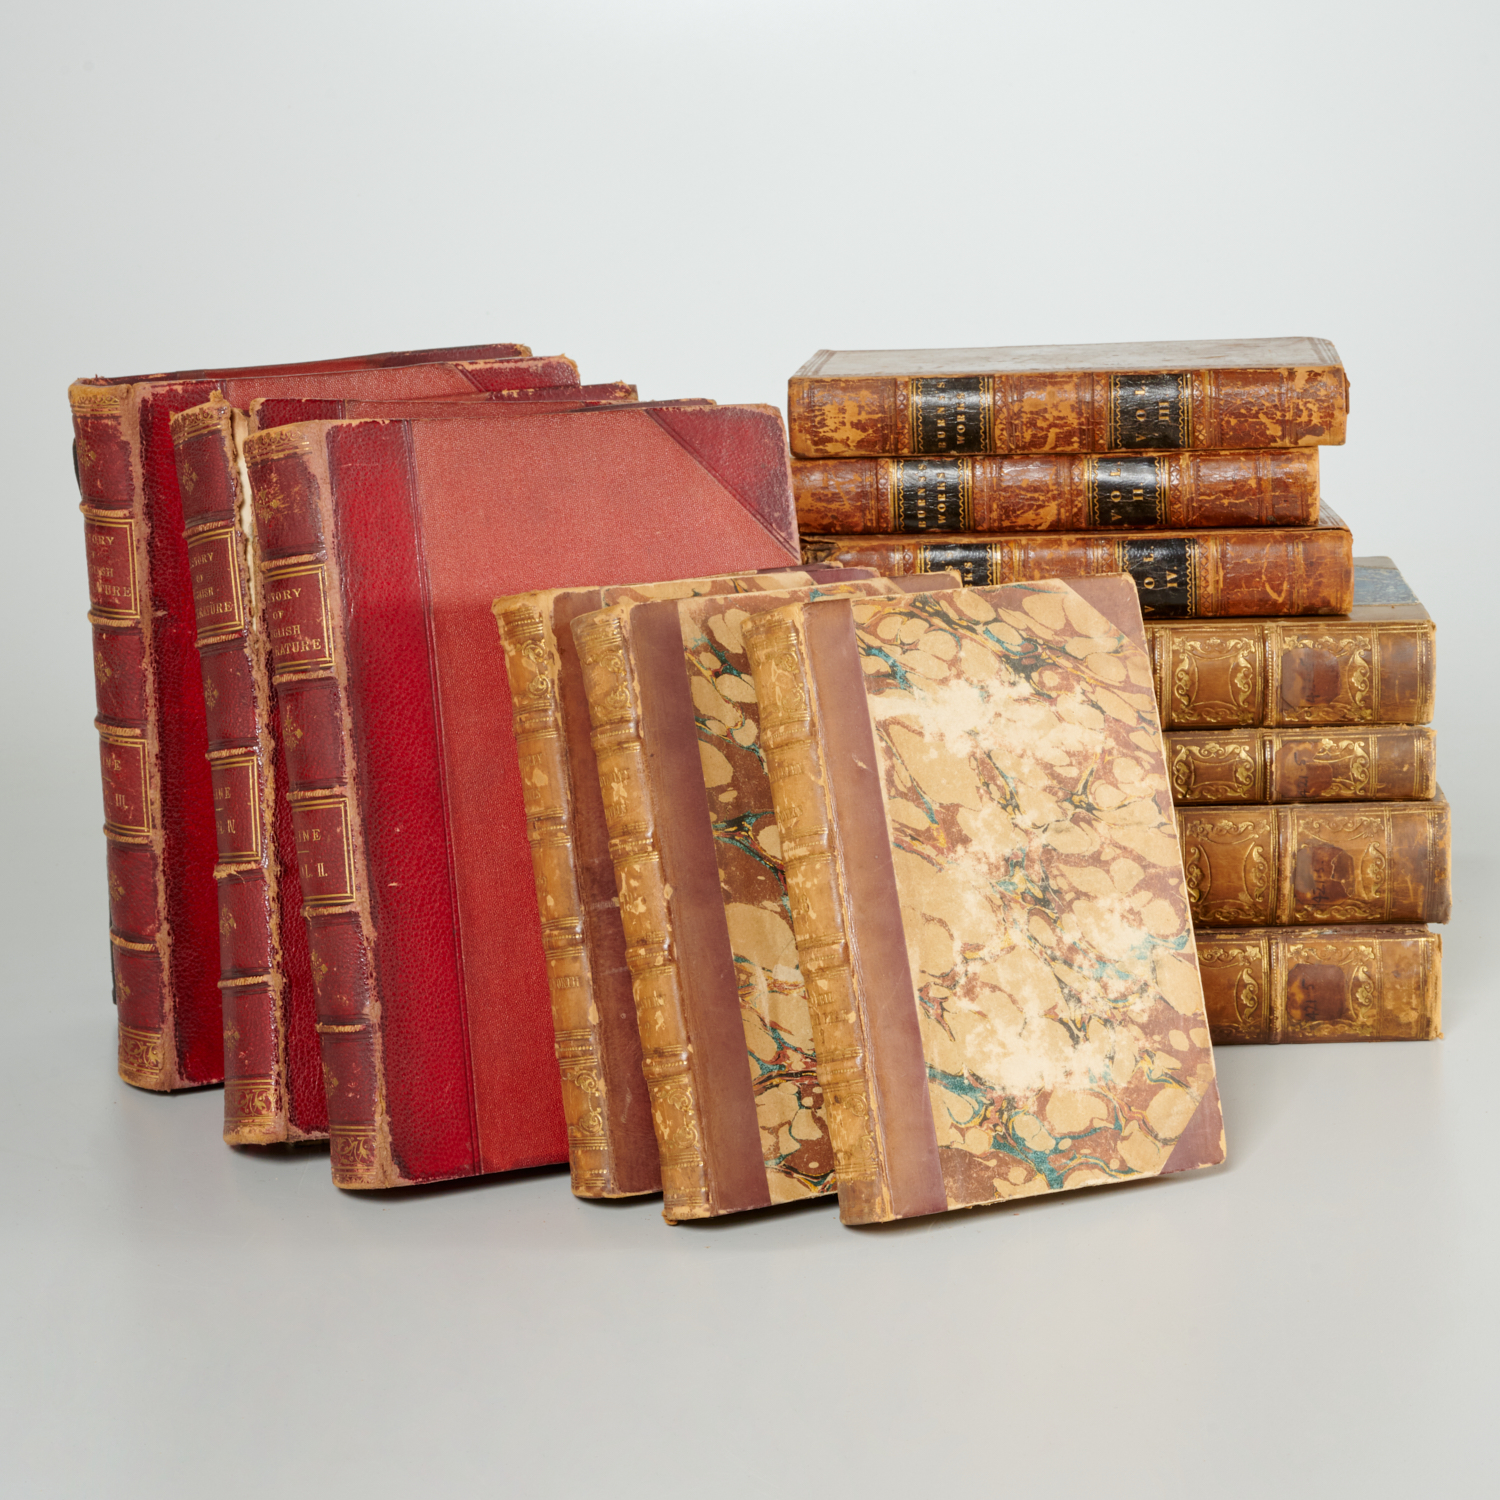  13 VOLS 19TH C LEATHERBOUND 361a0f